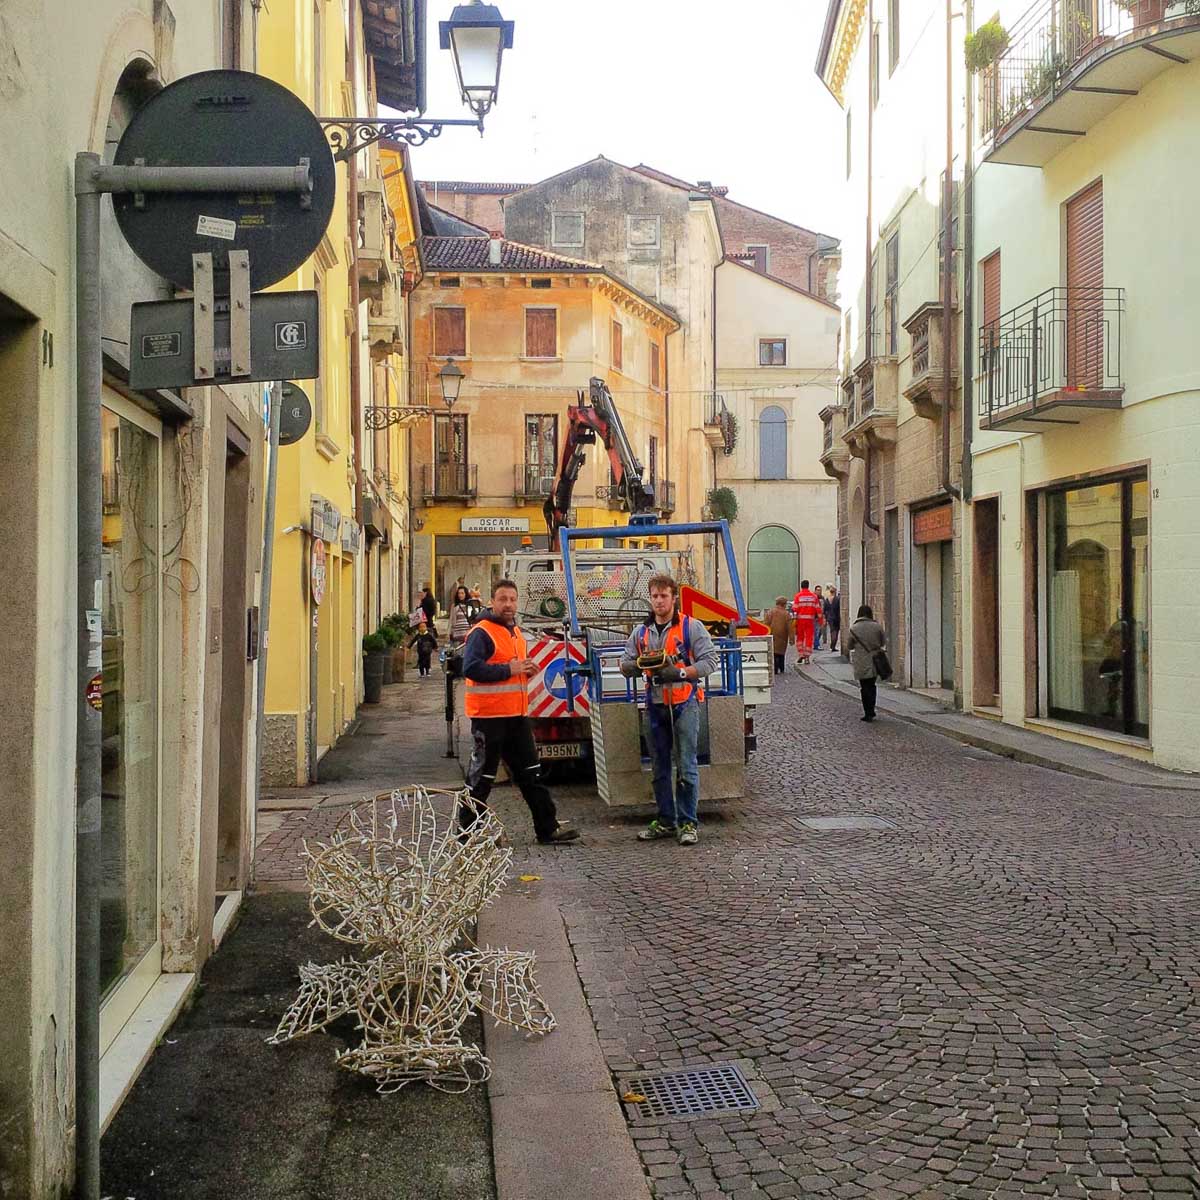 Workers hanging Christmas decorations in the historic centre - Vicenza, Italy - rossiwrites.com